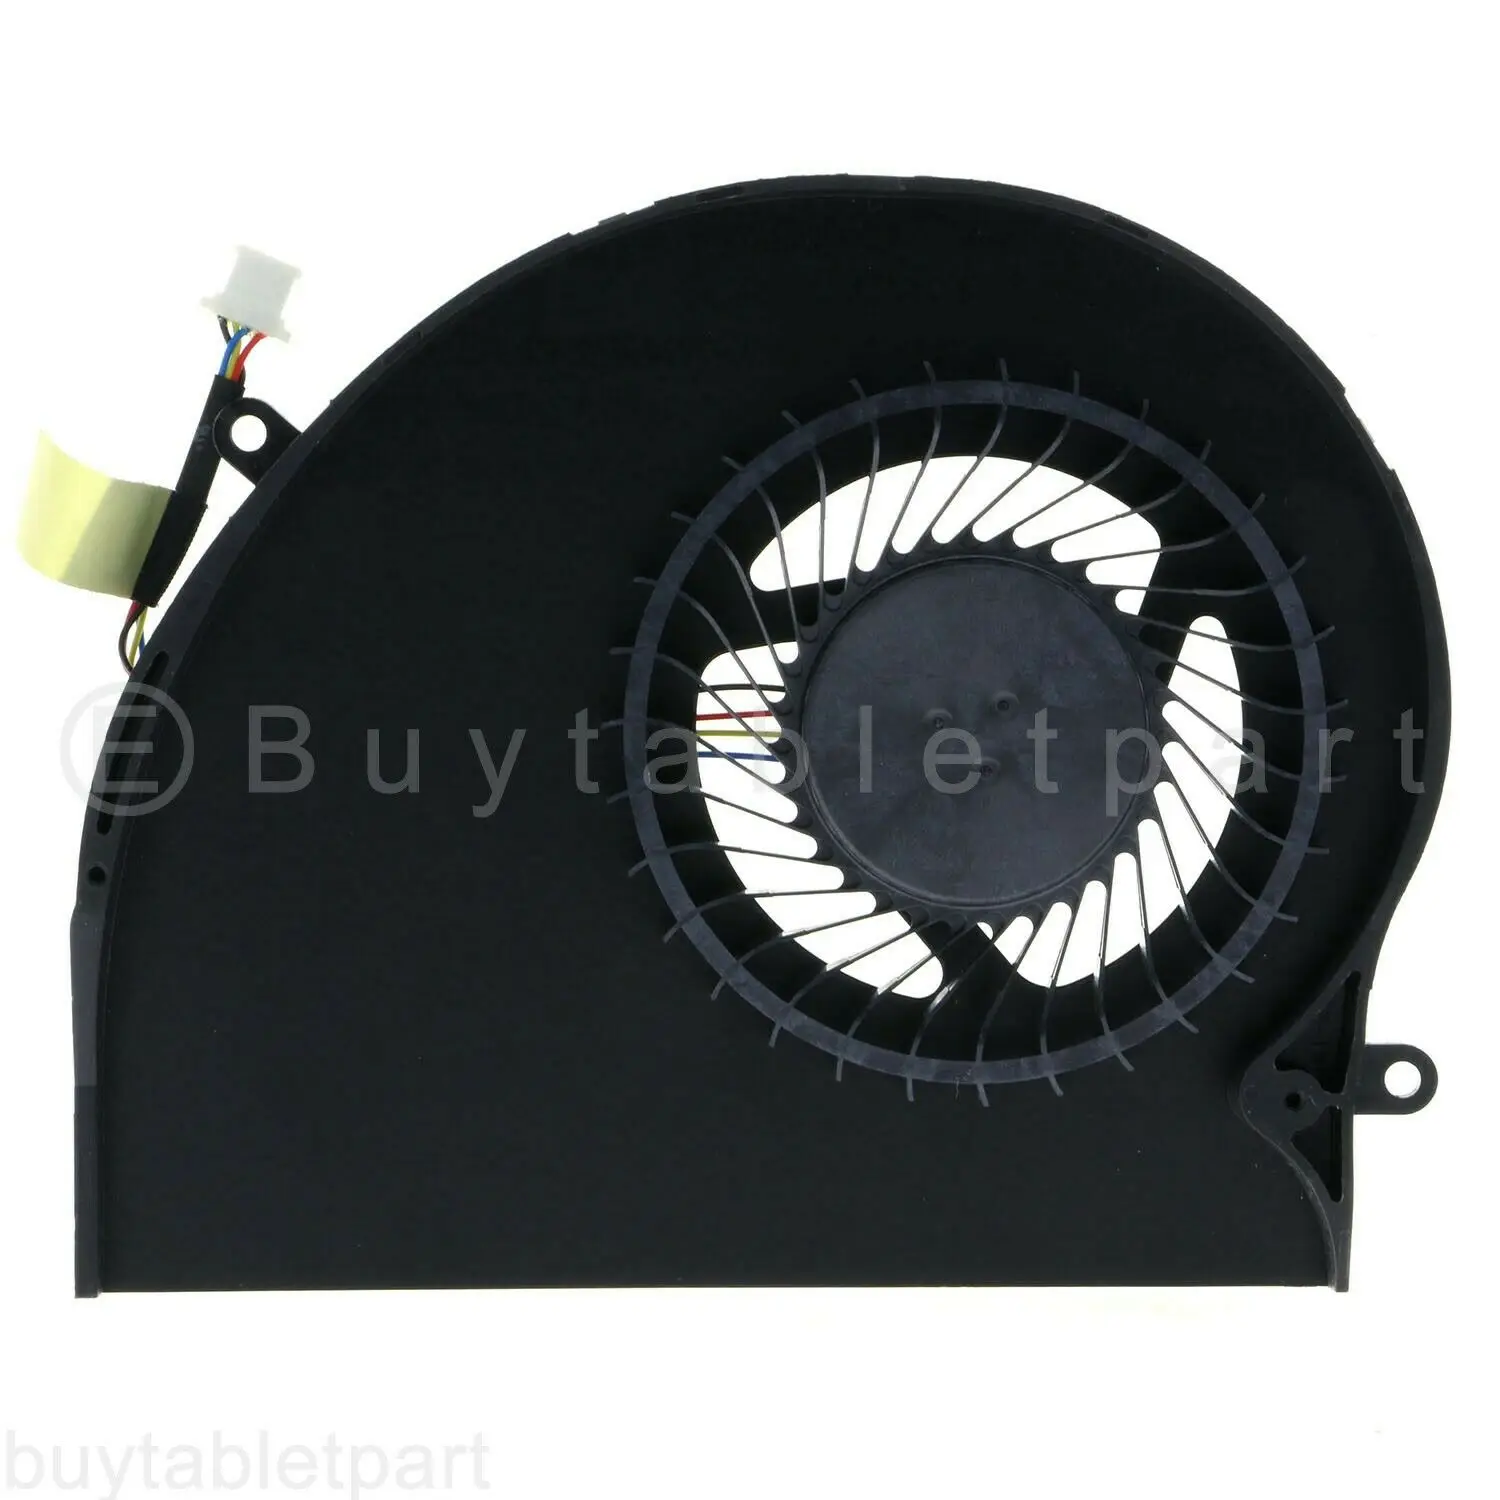 Alienware NEW CPU+GPU Cooling Fan For Dell Alienware 17 R4 R5 P31E ALW17C Laptop 04RFW1 